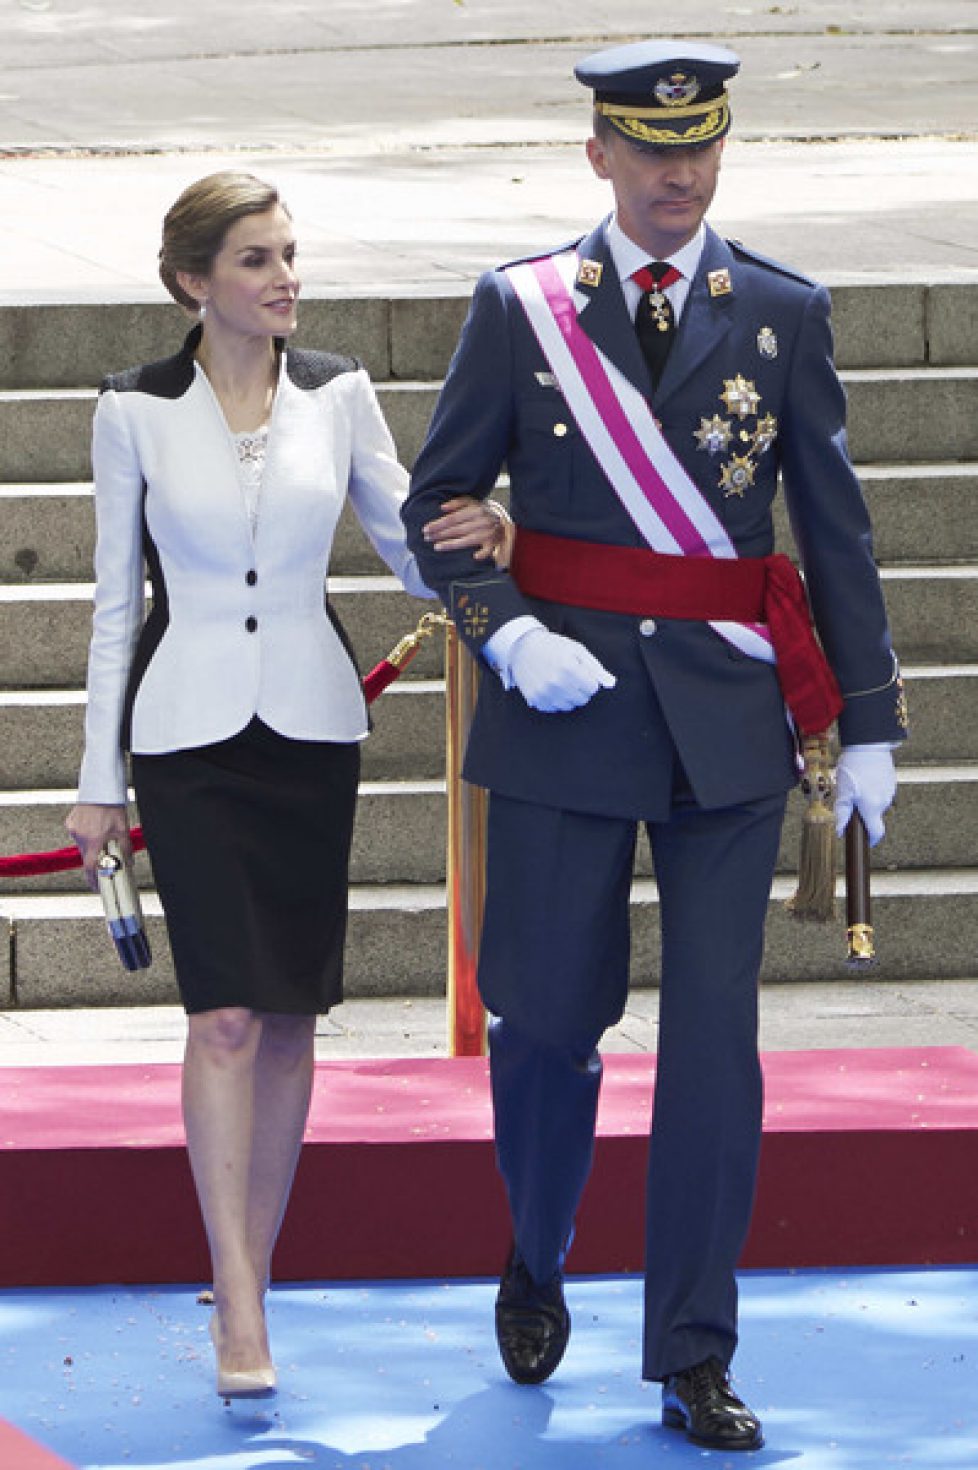 Spanish+Royals+Attend+Armed+Forces+Day+Hommage+c5Ck2rWzs1gl